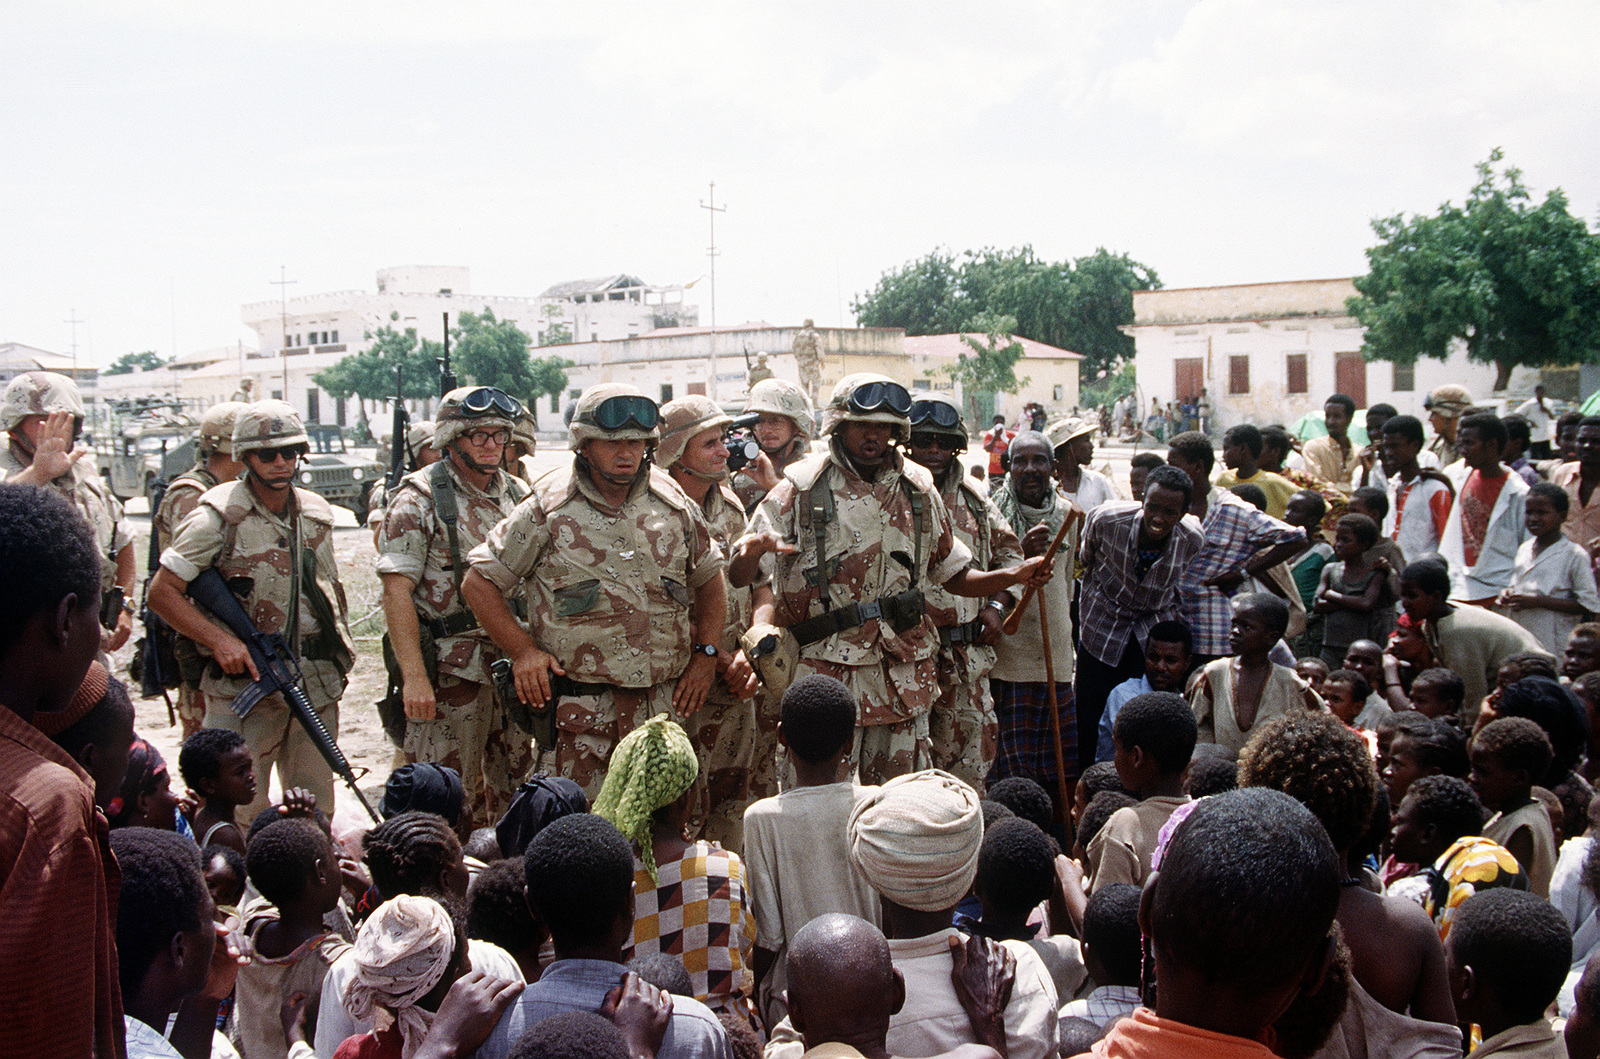 <i>Image Source: <a href='https://picryl.com/media/a-marine-colonel-addresses-with-the-aid-of-an-interpreter-a-group-of-somalis-6a76dc'>The U.S. National Archives</a></i>